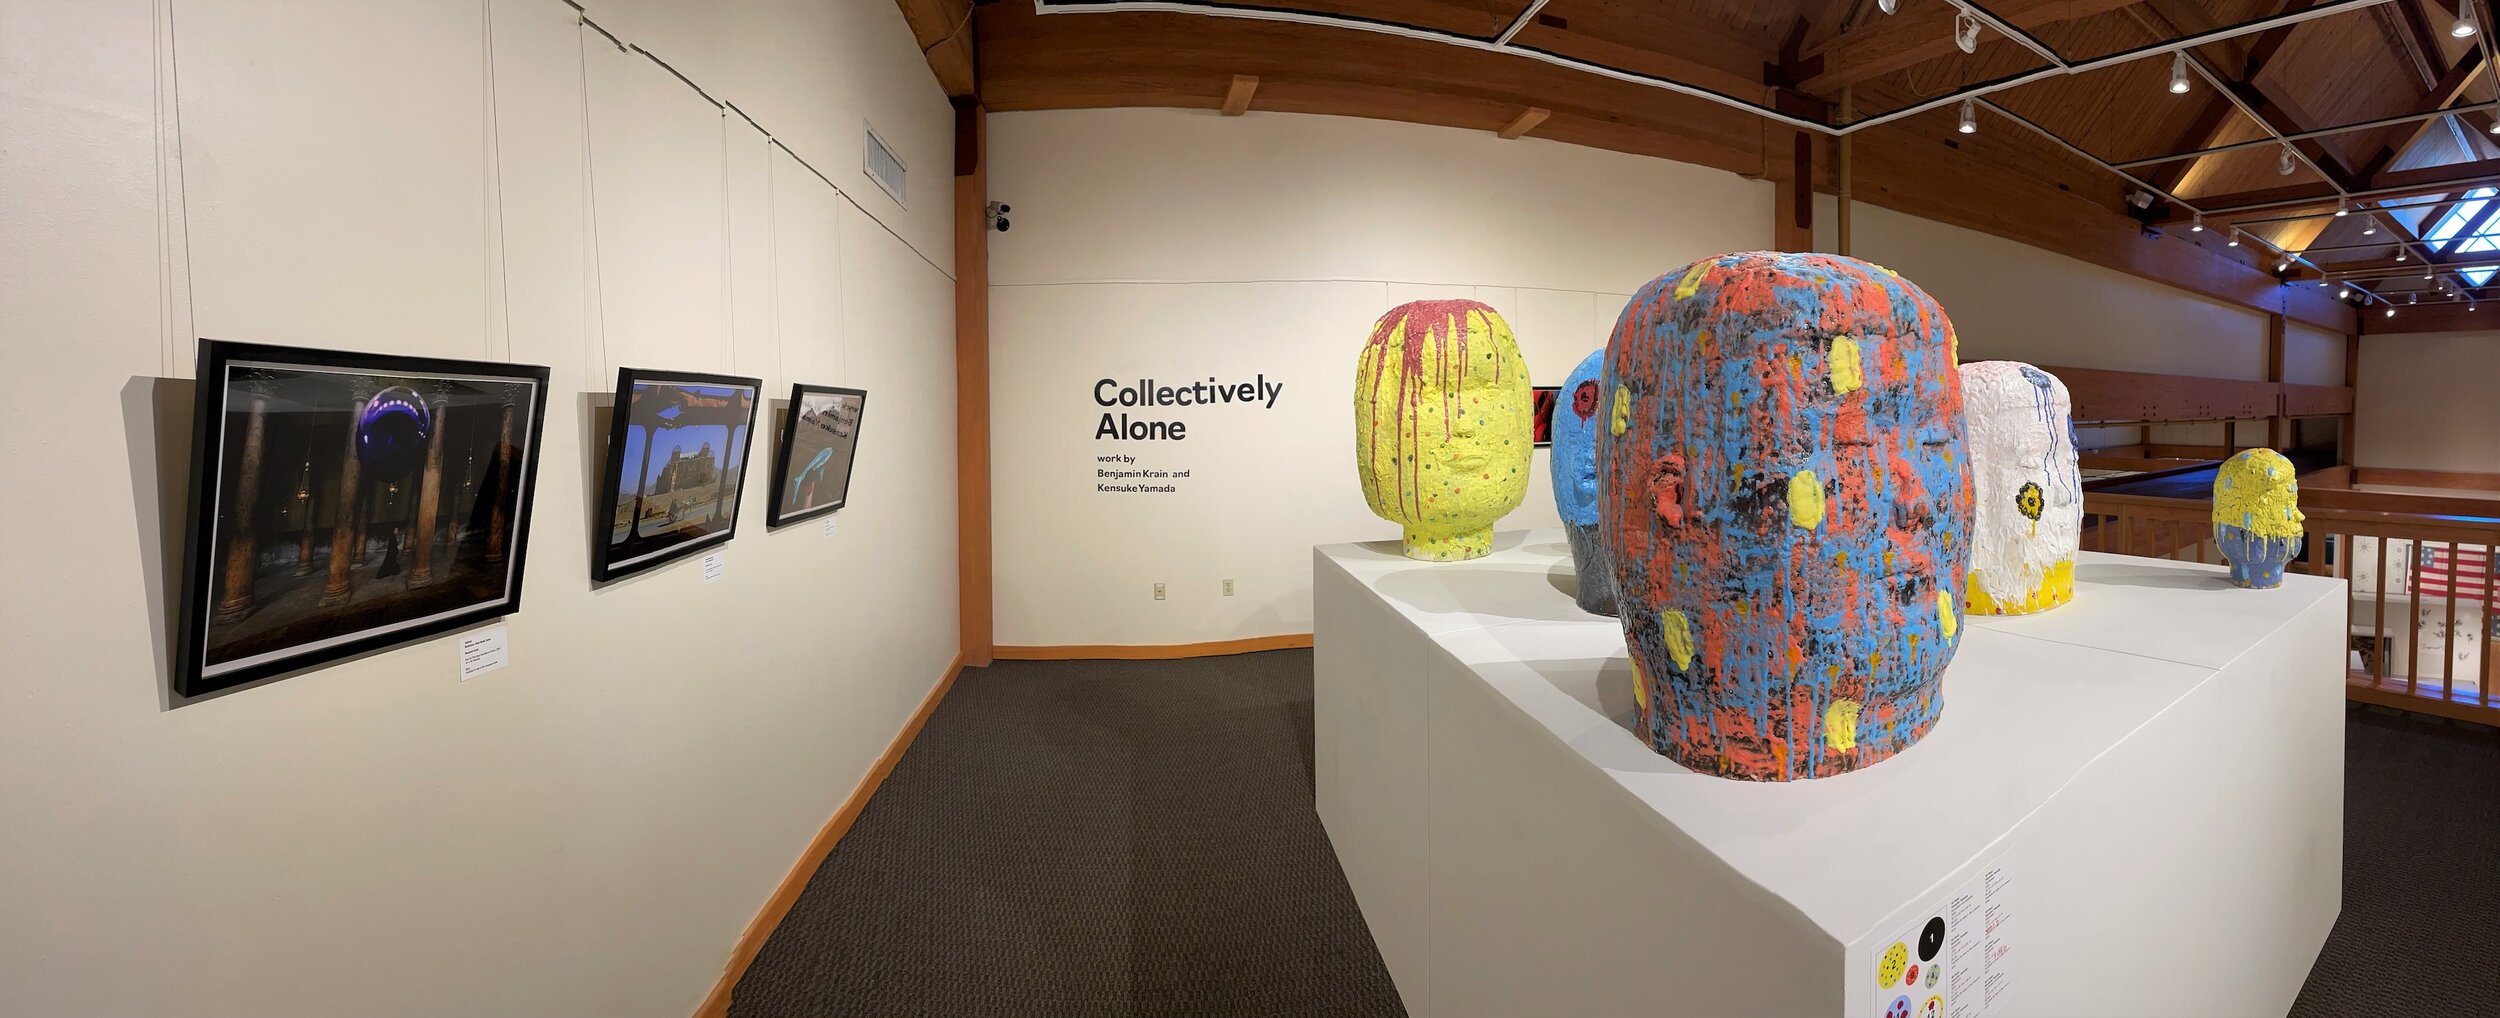 Collectively Alone featuring Benjamin Krain and Kensuke Yamada, a recent exhibit in Trinity Gallery